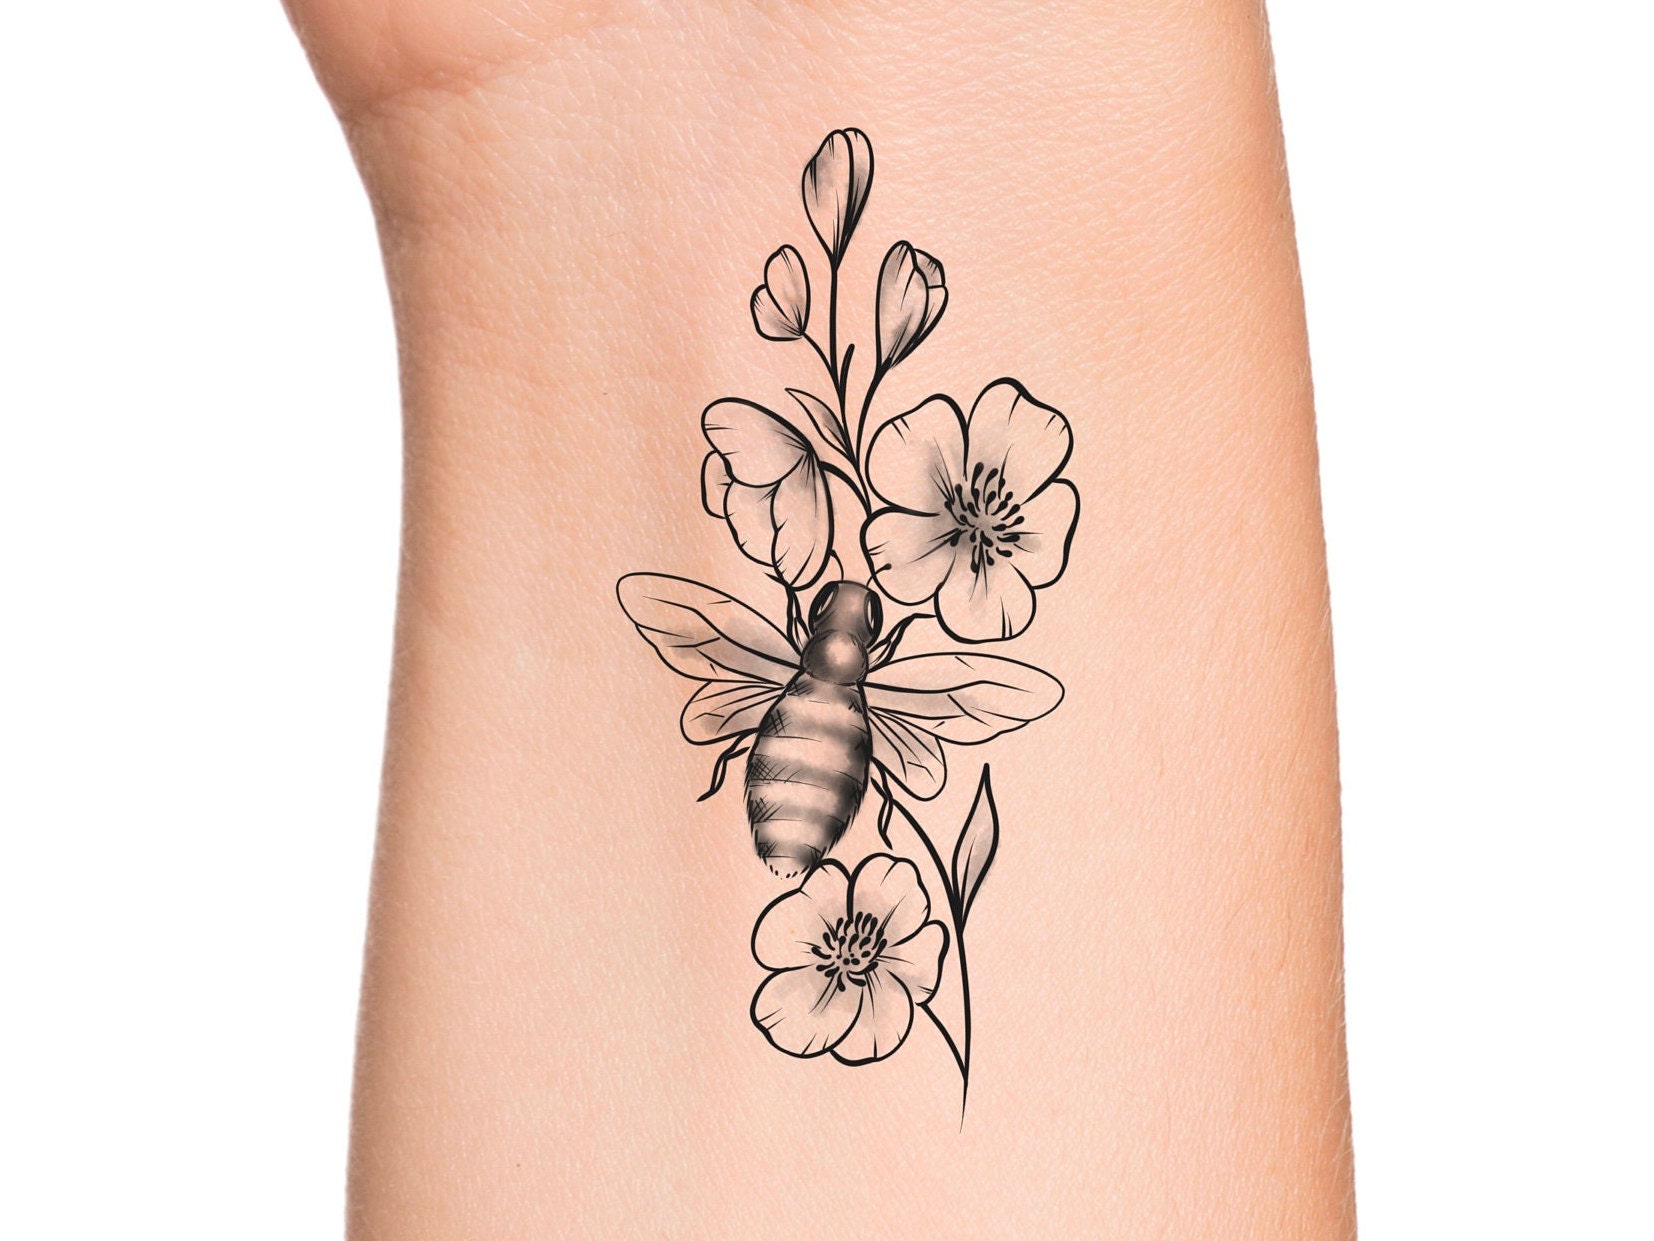 Bumble Bee Floral Temporary Tattoo / Bee Tattoo / Floral - Etsy